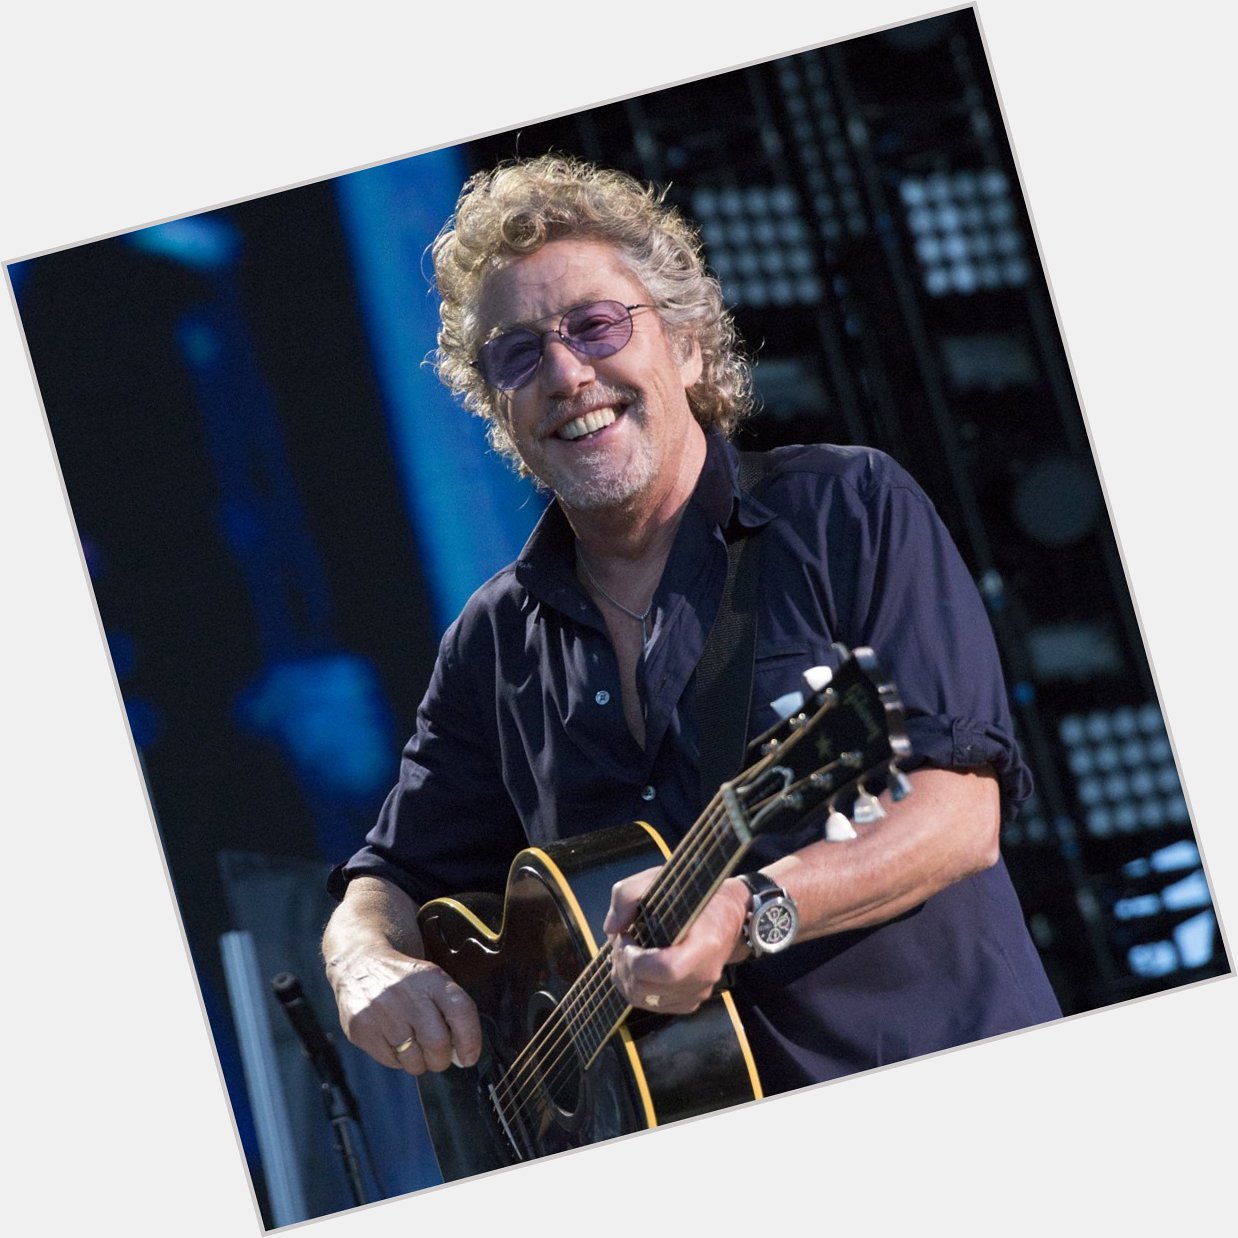    Wishing a very happy birthday to our incredible Honorary Patron Roger Daltrey CBE!   